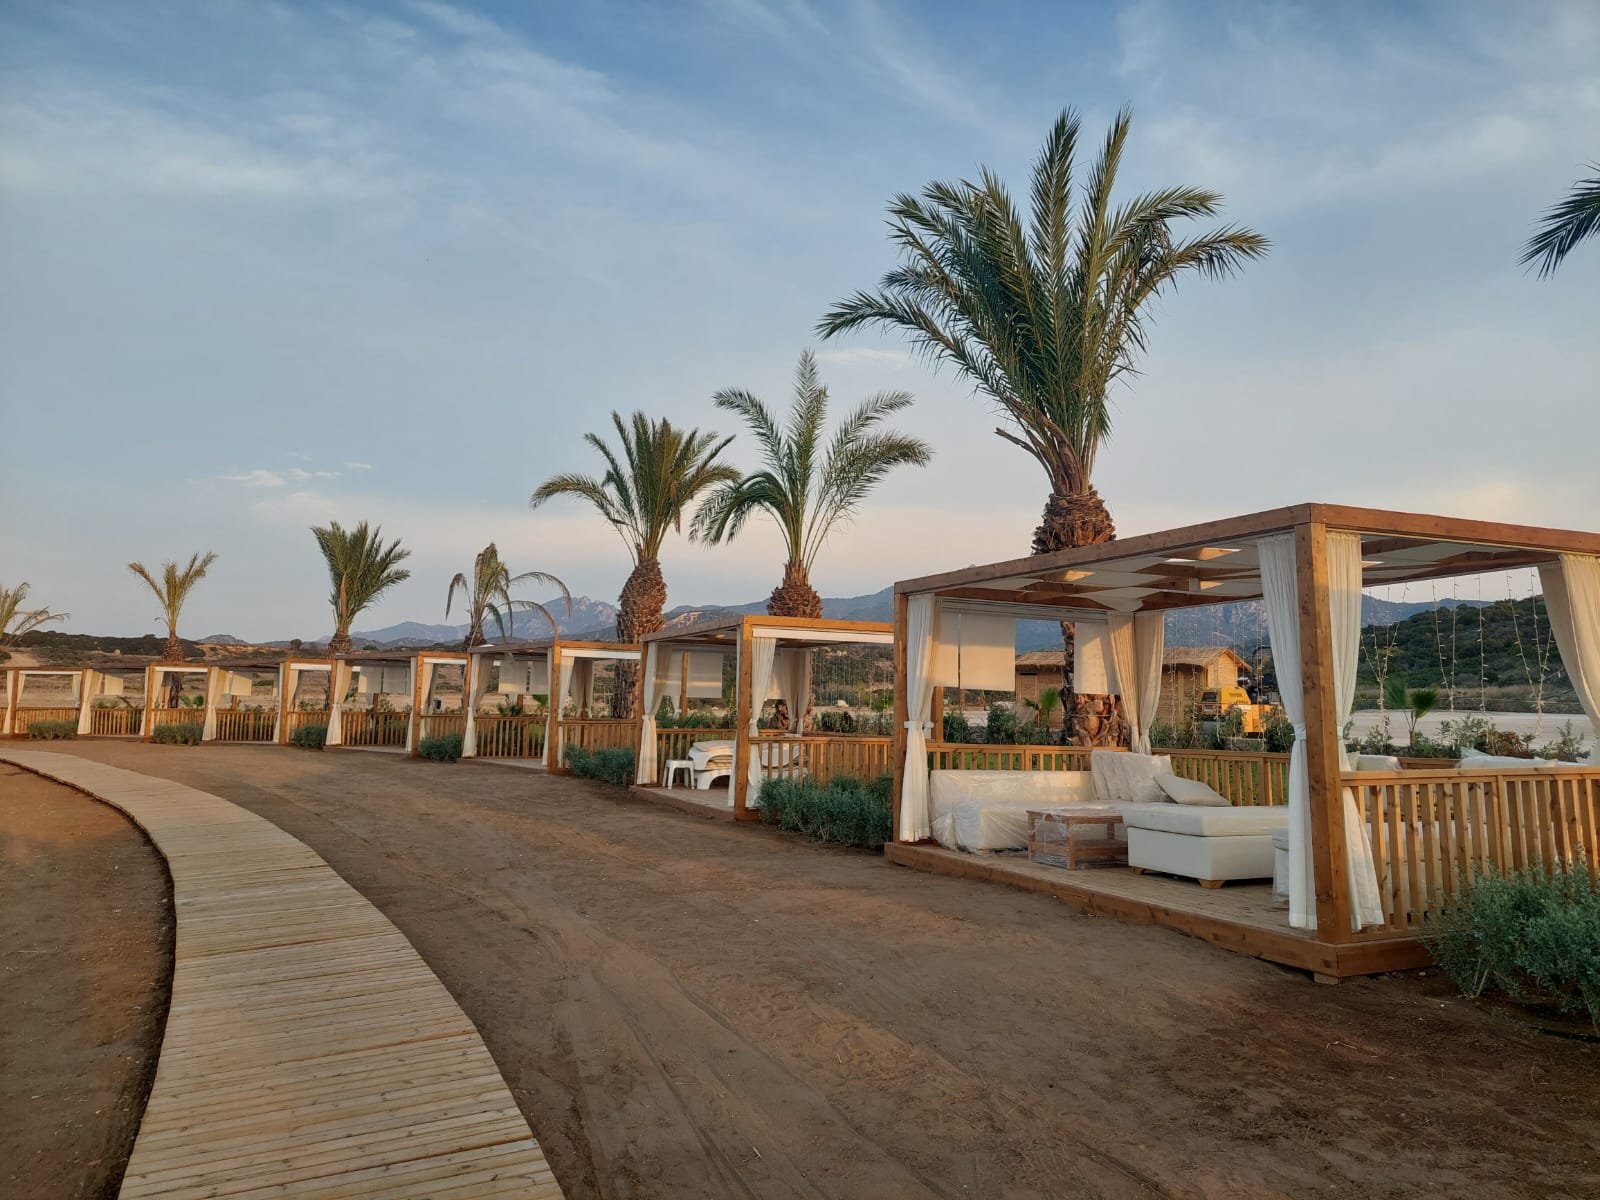 Don't Miss the Holiday Home Opportunity in Esentepede-bce5cfc1-ba0a-4dbc-88b5-17b0d845d524